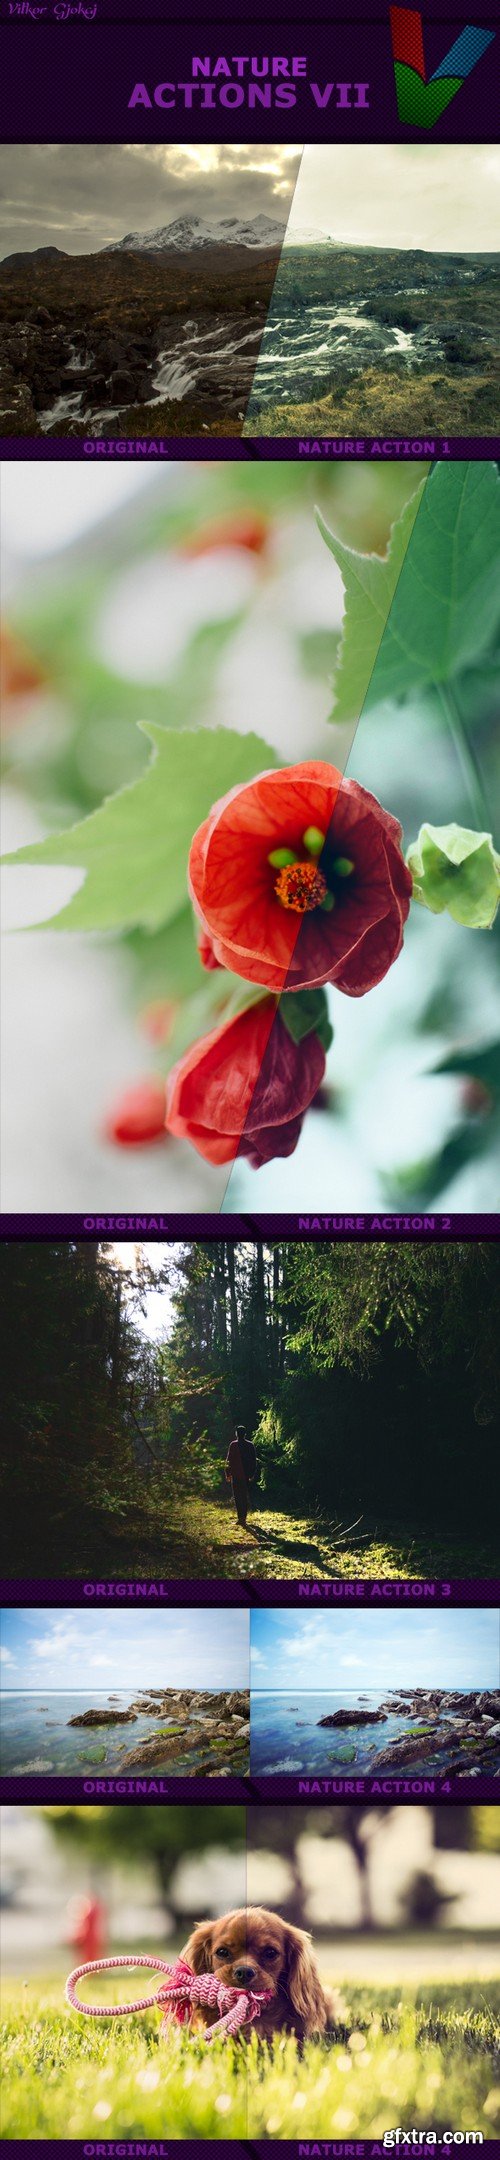 Graphicriver - Nature Actions VII 16963077